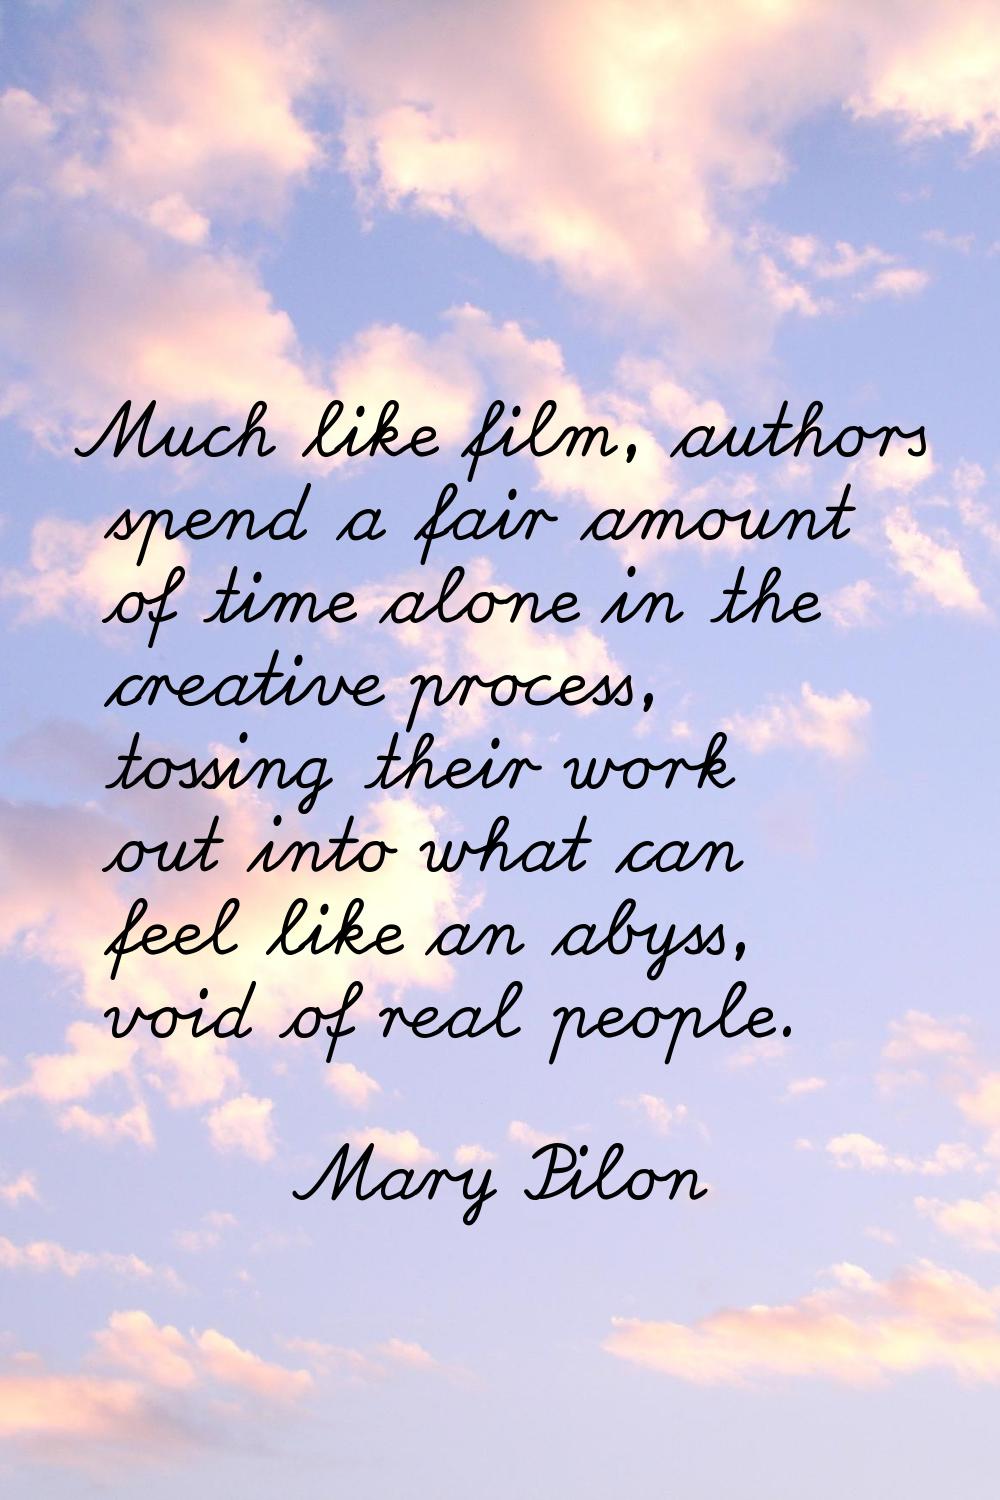 Much like film, authors spend a fair amount of time alone in the creative process, tossing their wo